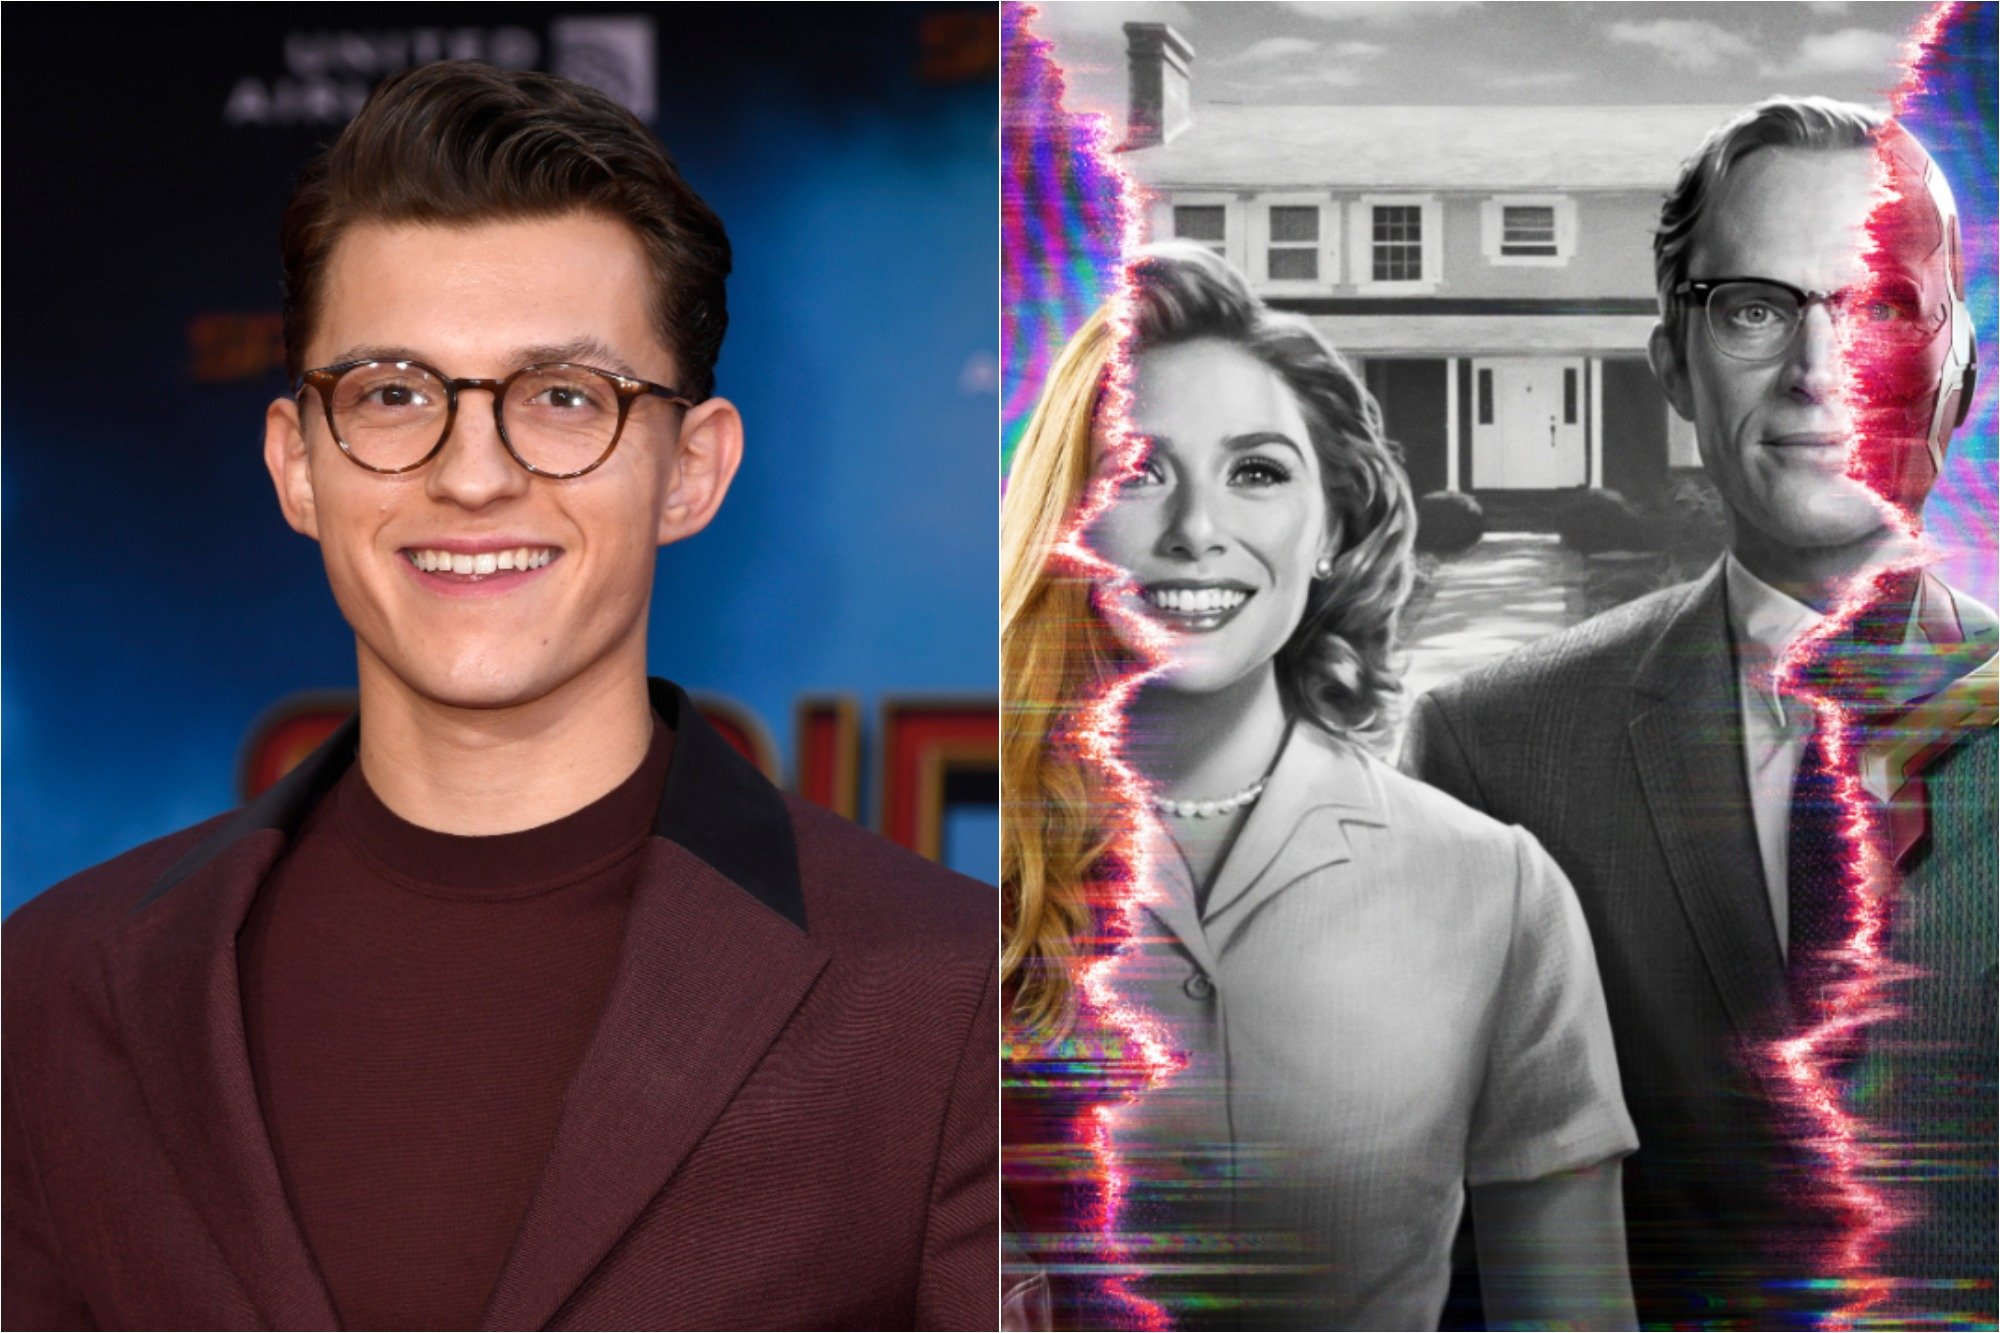 (L) Tom Holland at the premiere of 'Spider-Man Far From Home' on June 26, 2019 / (R) Promotional poster for 'WandaVision' starring Elizabeth Olsen and Paul Bettany